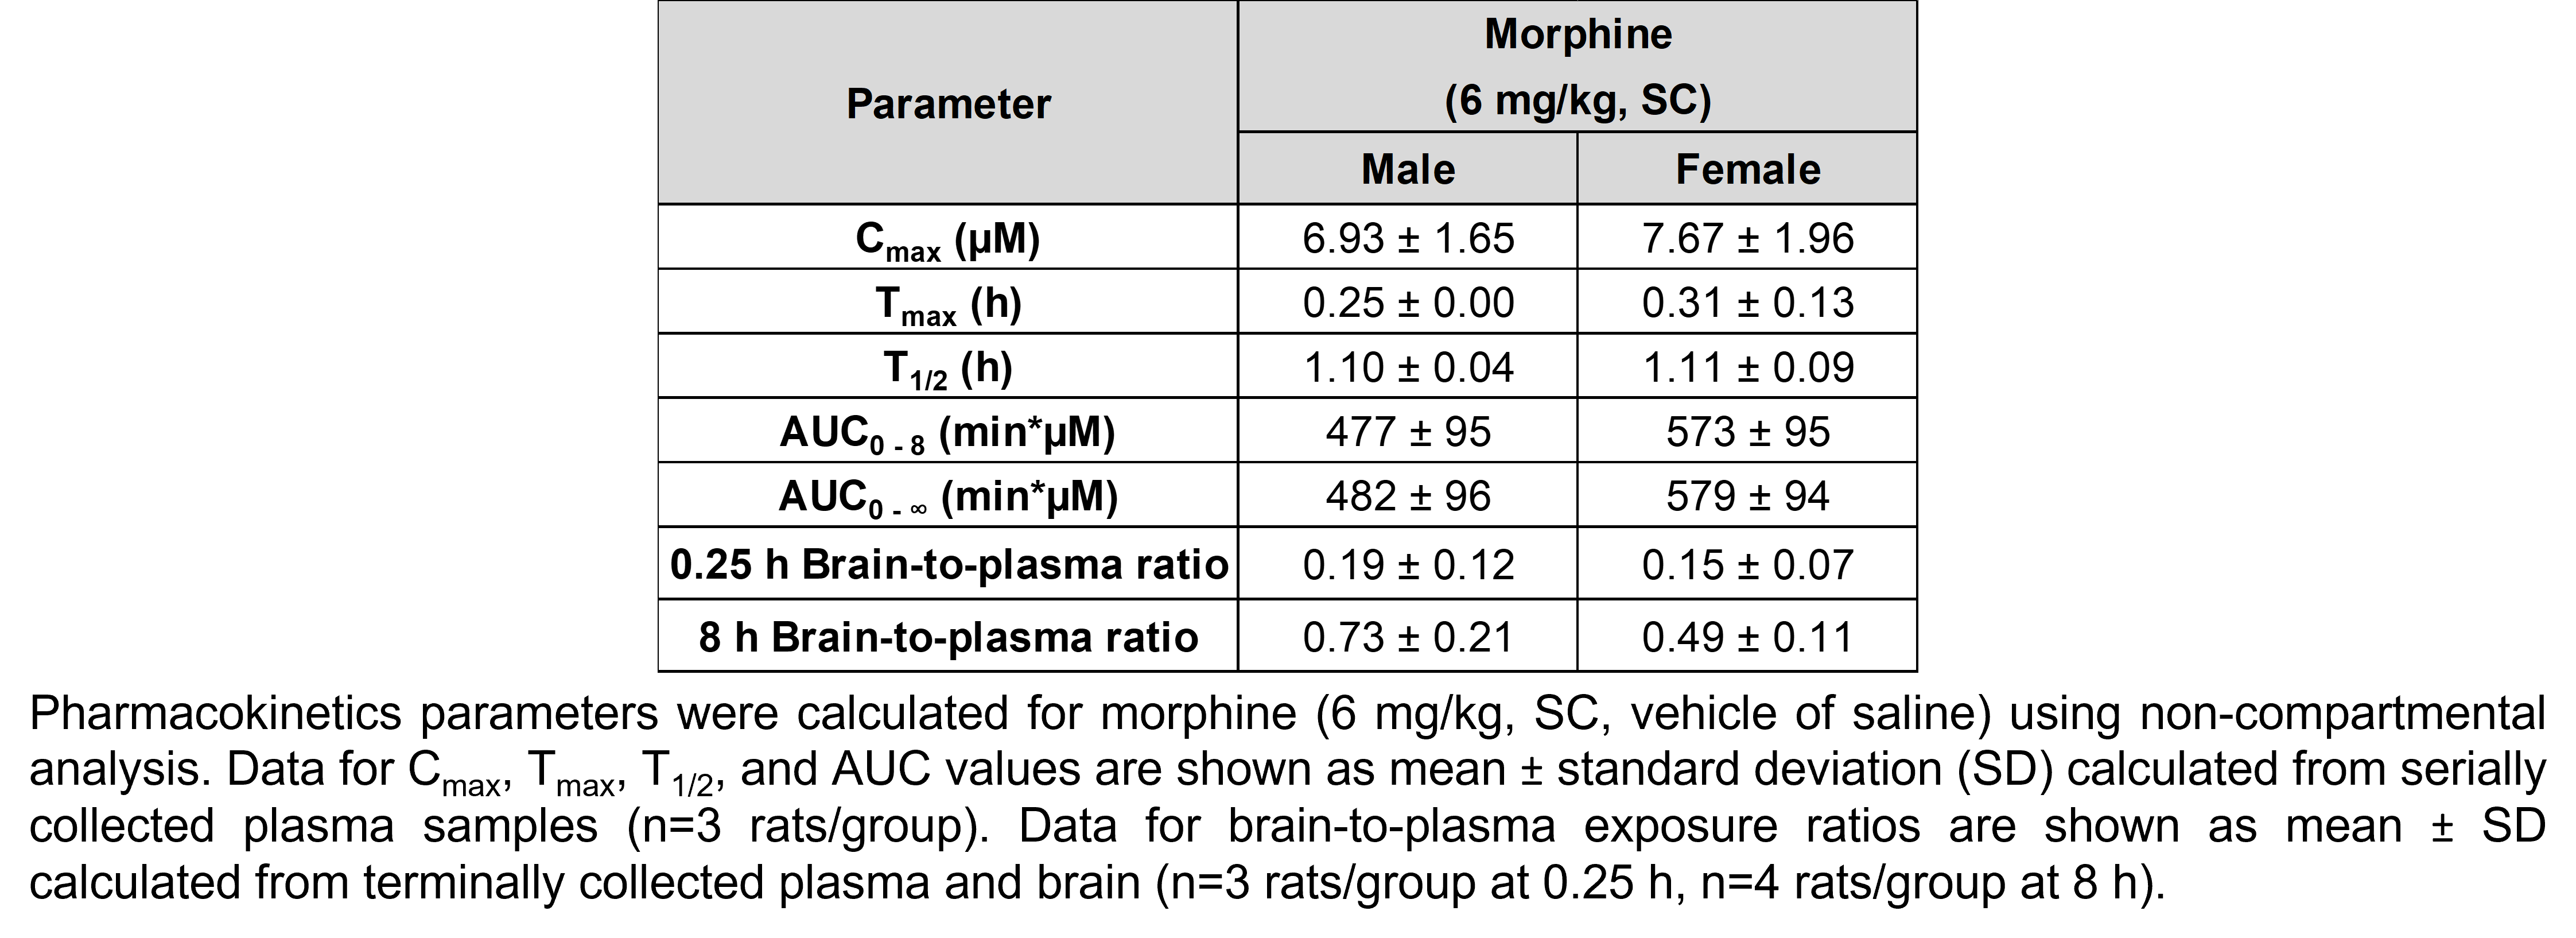 A table shows pharmacokinetics parameters calculated for morphine using non-compartmental analysis in male and female rats treated with morphine (6 mg/kg, SC, vehicle of saline). The means for the 2 groups (males and females treated with 6 mg/kg morphine, respectively) are as follows. The highest concentration (Cmax) was 6.93 and 7.67 µM; the time at the maximum concentration (Tmax) was 0.25 and 0.31 hours; the half-life (T1/2) was 1.1 and 1.11 hours; area under the curve for time 0 to 8 hours was 477 and 573 minutes*µM; area under the curve for time 0 to infinity was 482 and 579 minutes*µM; the brain-to-plasma ratio at 0.25 hours was 0.19 and 0.15; the brain-to-plasma ratio at 8 hours was 0.73 and 0.49